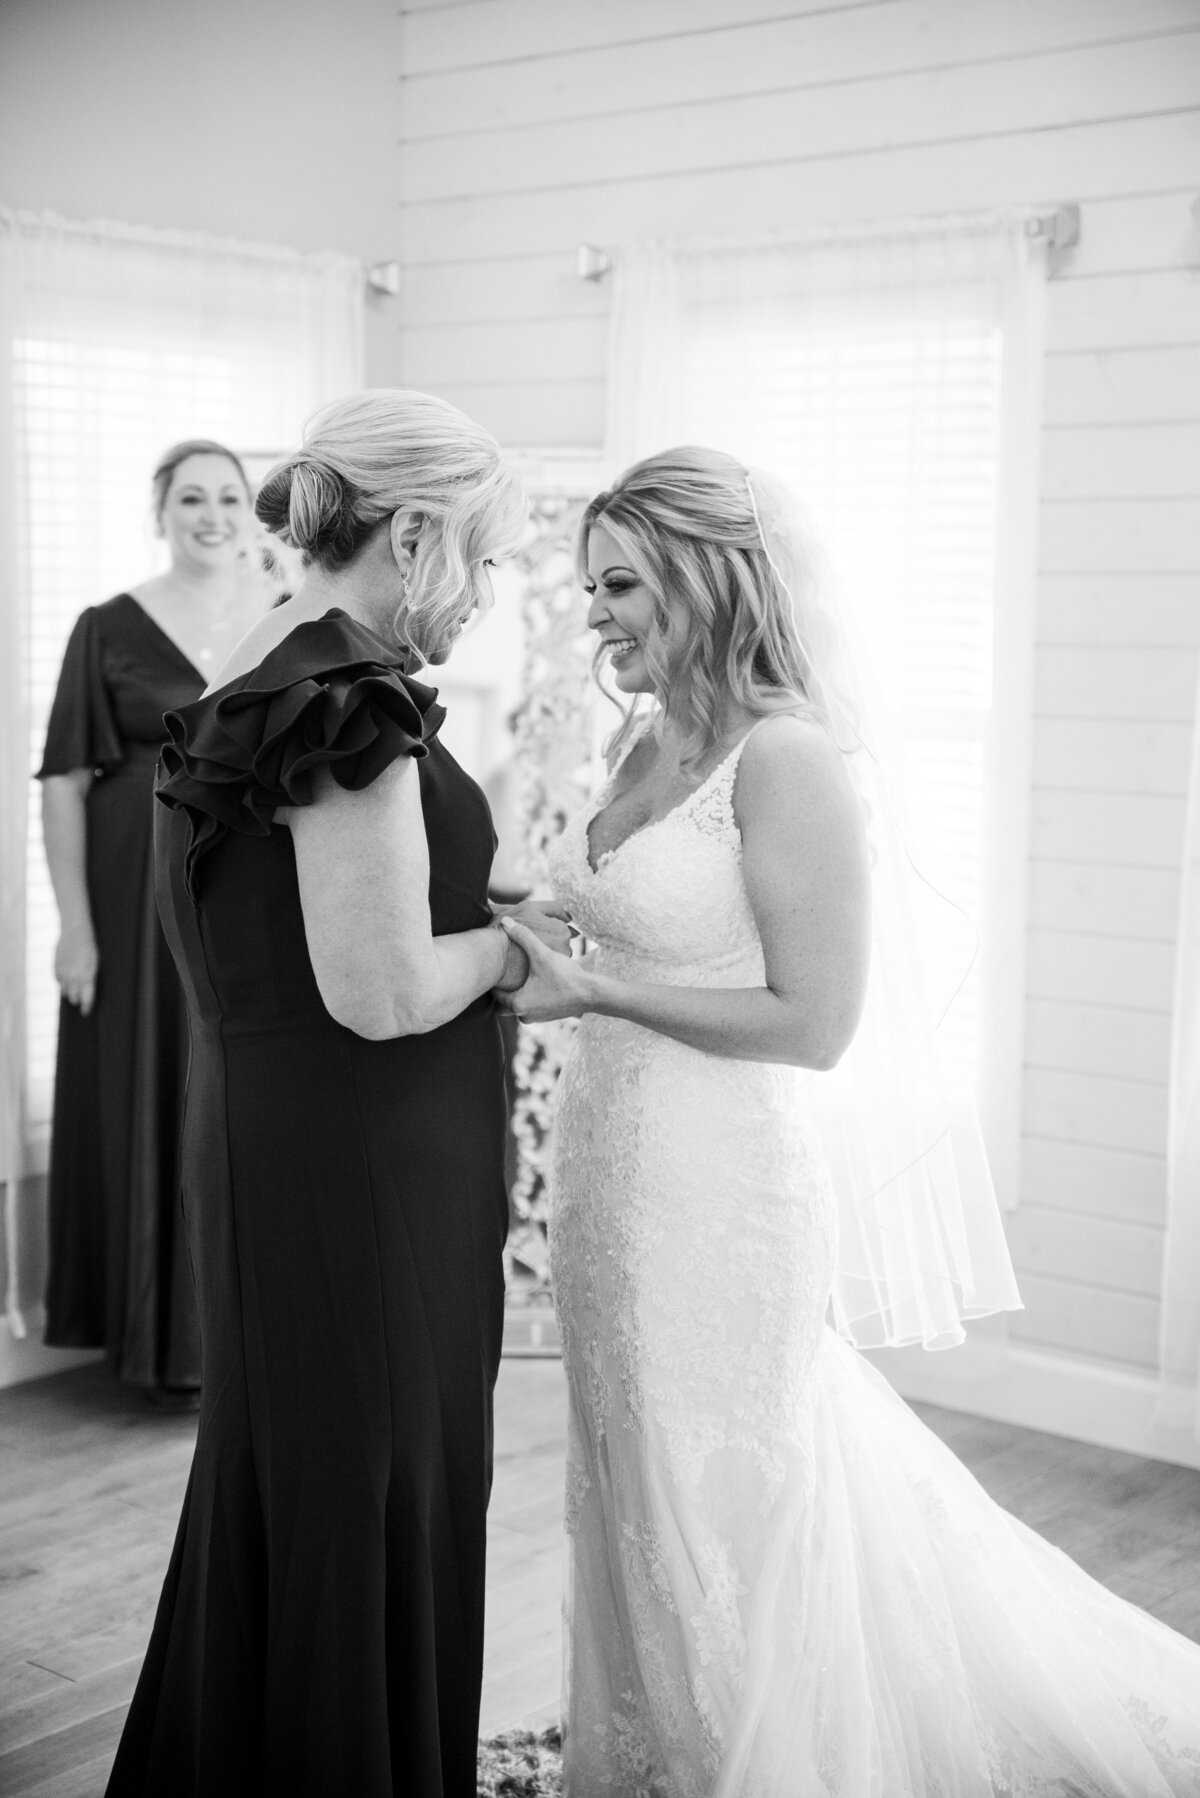 A bride and mom smile at each other and hold hands in a sentimental, candid moment captured by Denver wedding photographer, Casey Van Horn.